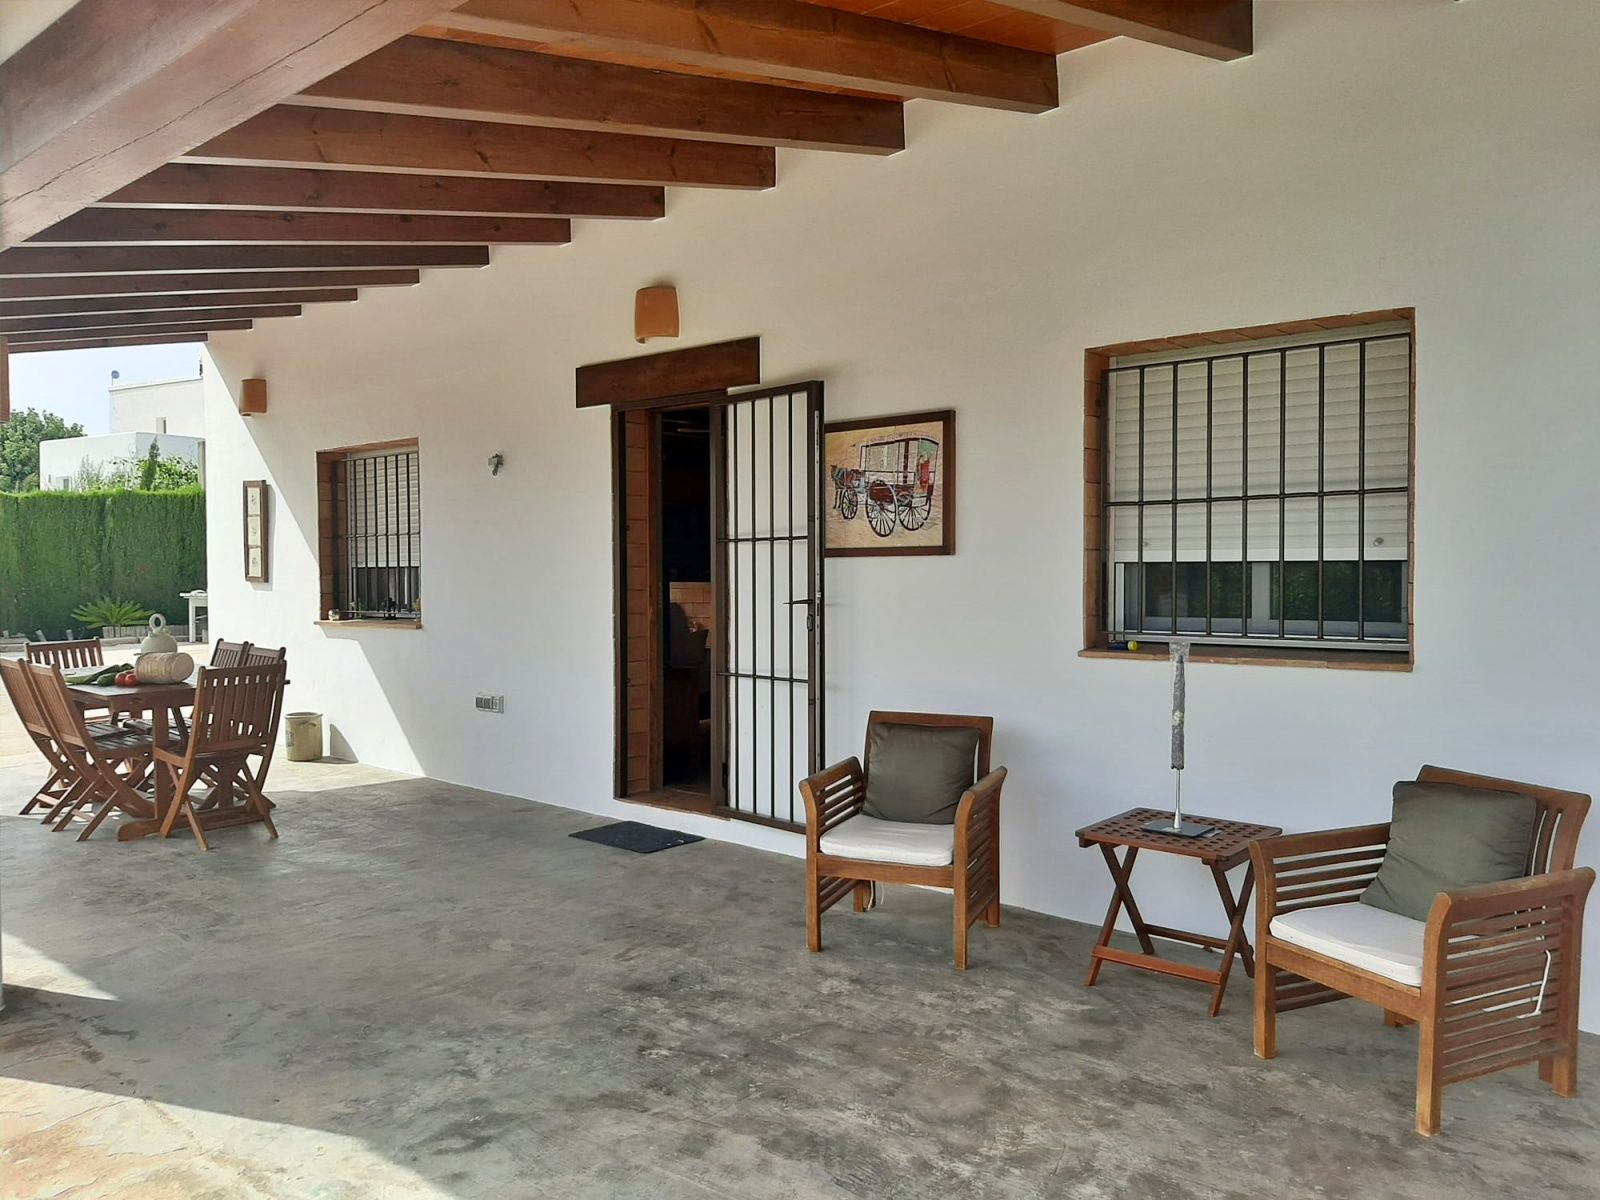 Detached finca available for winter rental